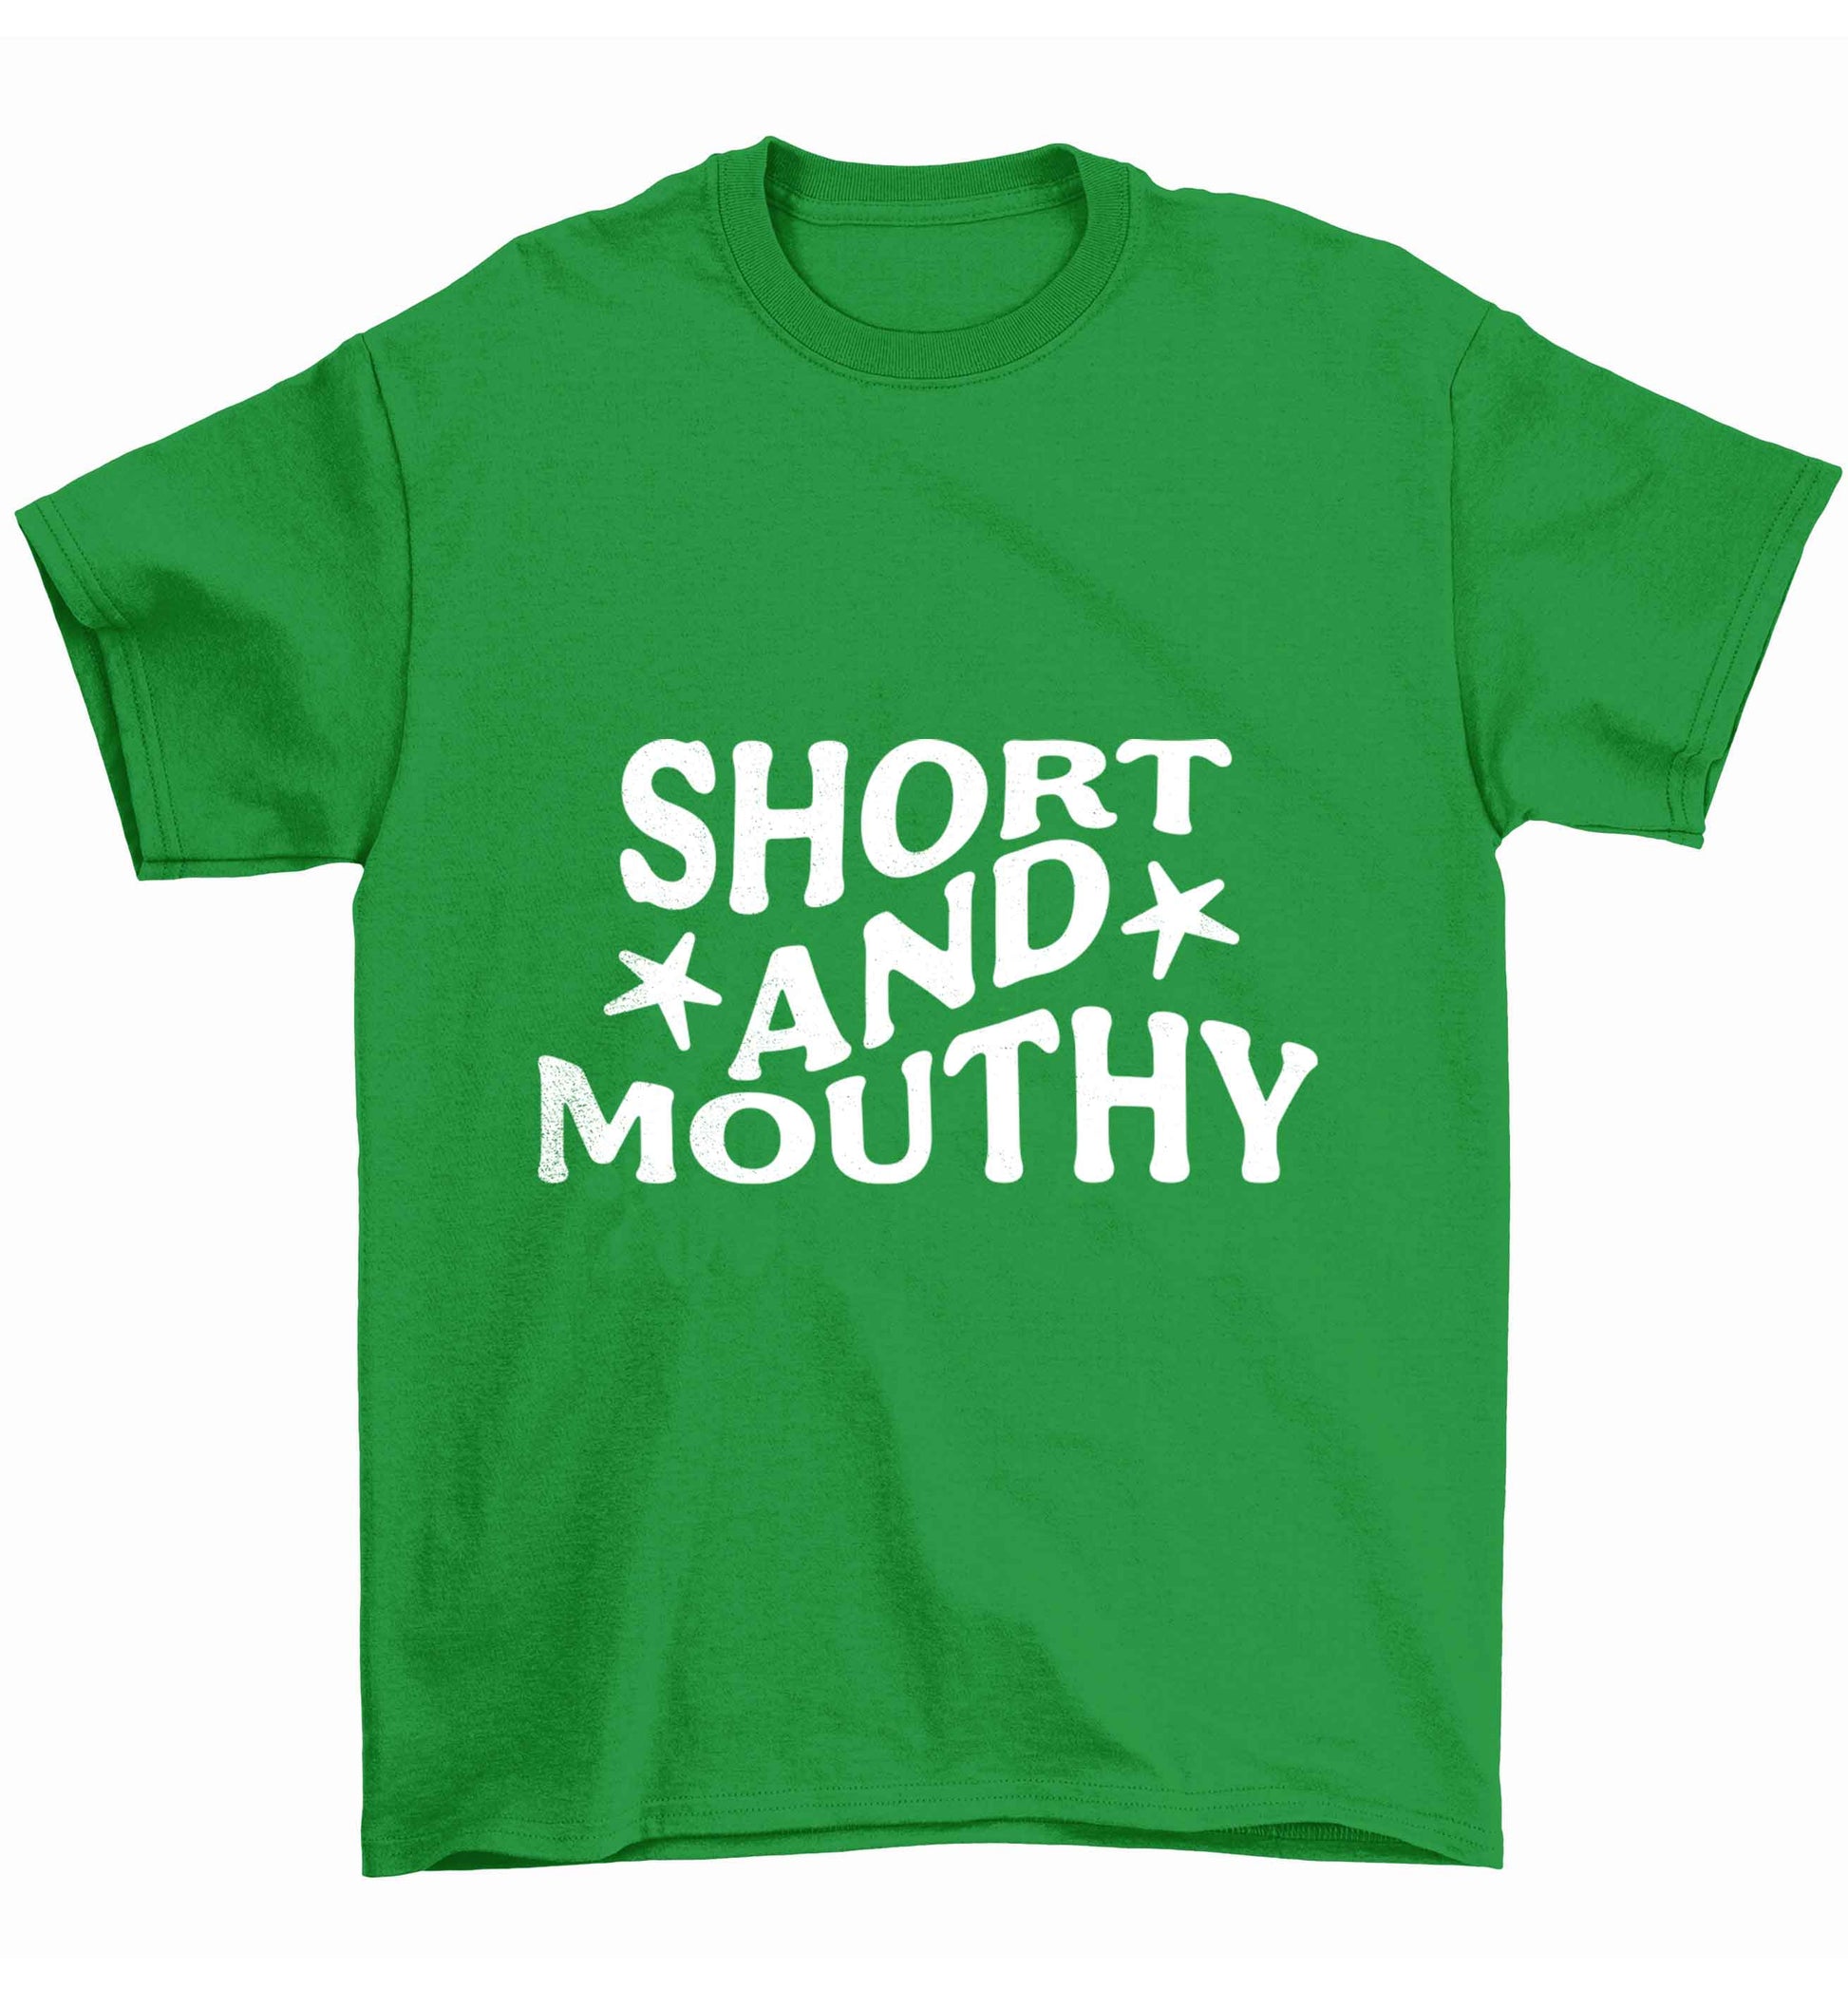 Short and mouthy Children's green Tshirt 12-13 Years